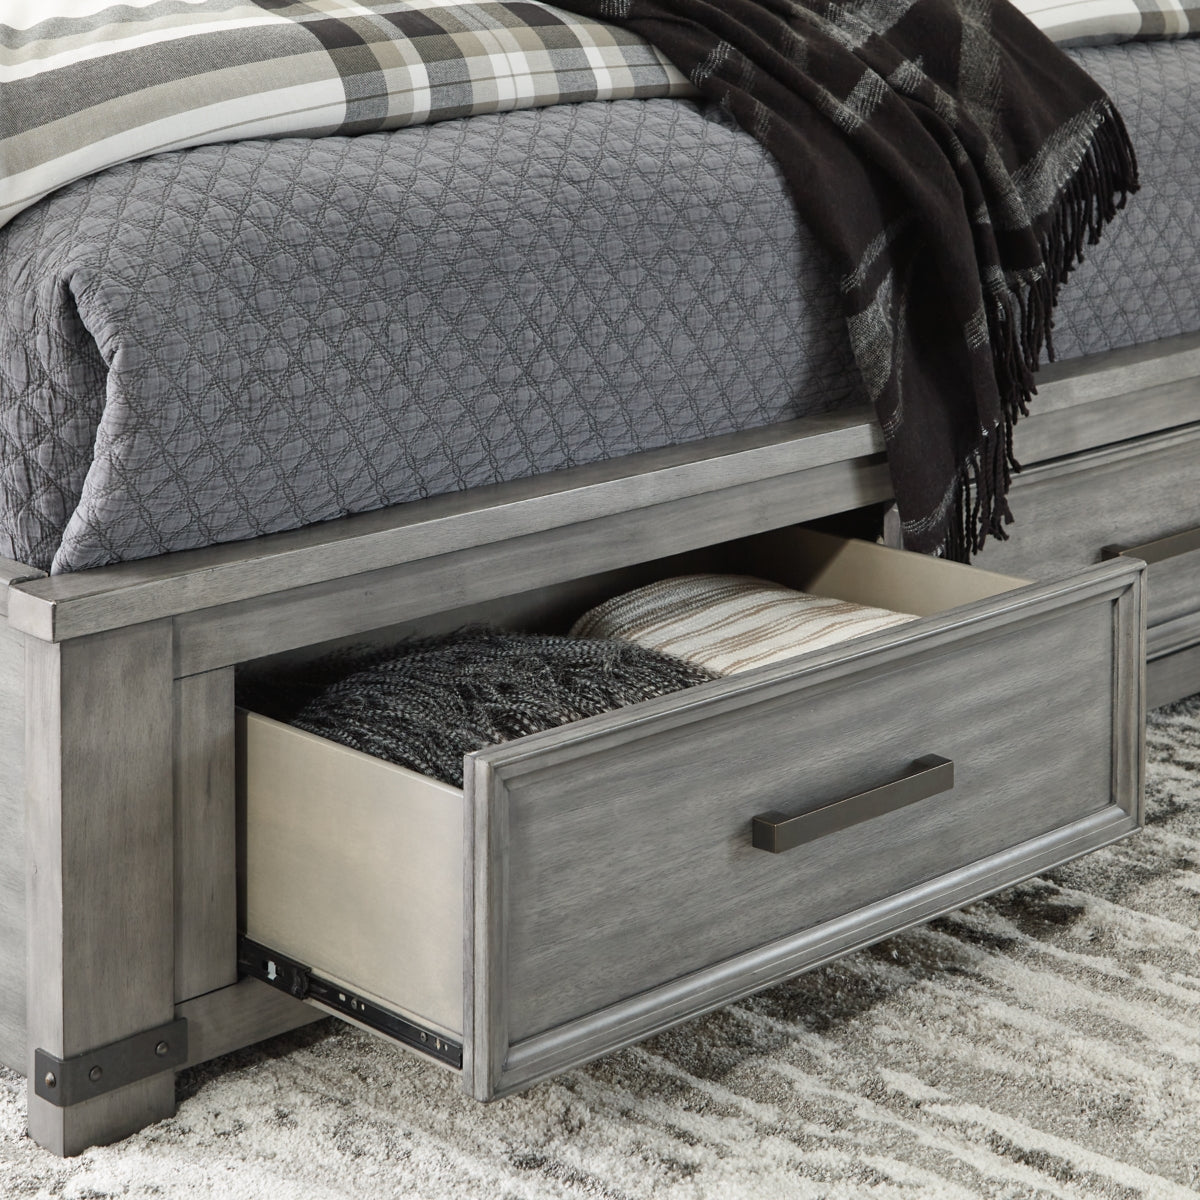 Russelyn King Storage Bed with Mirrored Dresser, Chest and 2 Nightstands